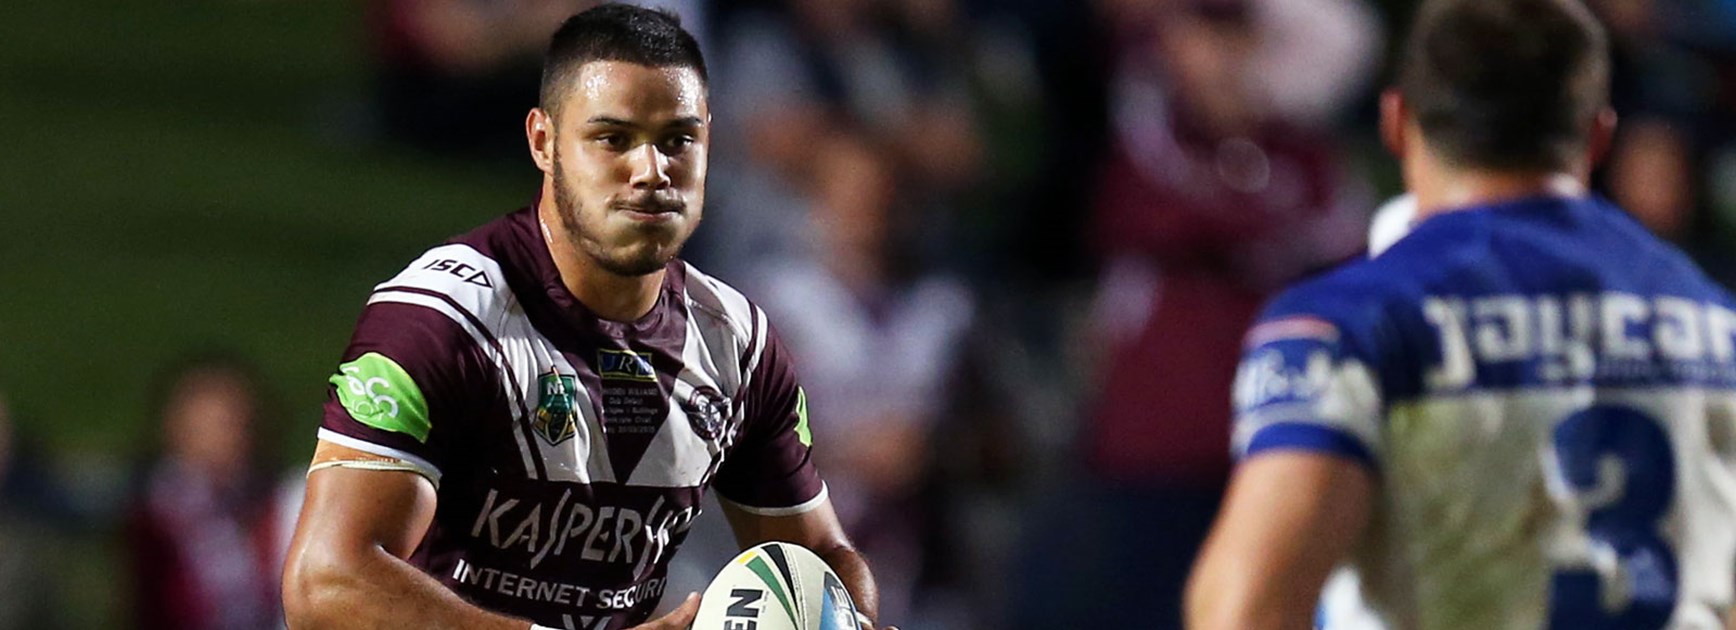 Manly outside back Brayden Wiliame is yet to taste victory in the NRL following 10 appearances with Parramatta and the Sea Eagles.